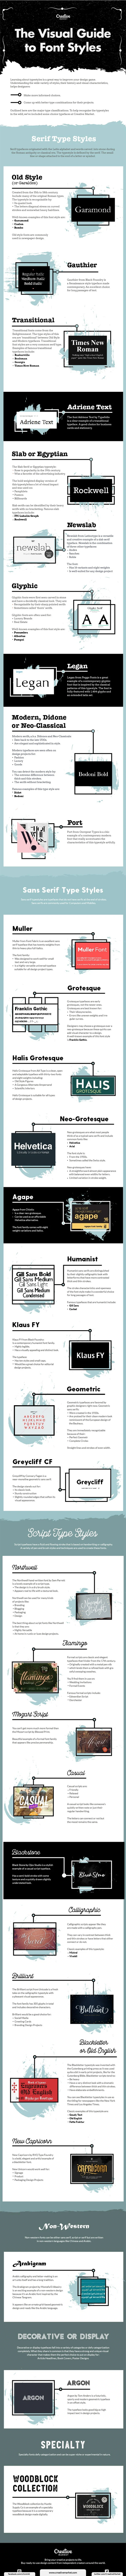 The Visual Guide to Font Styles - #Infographic